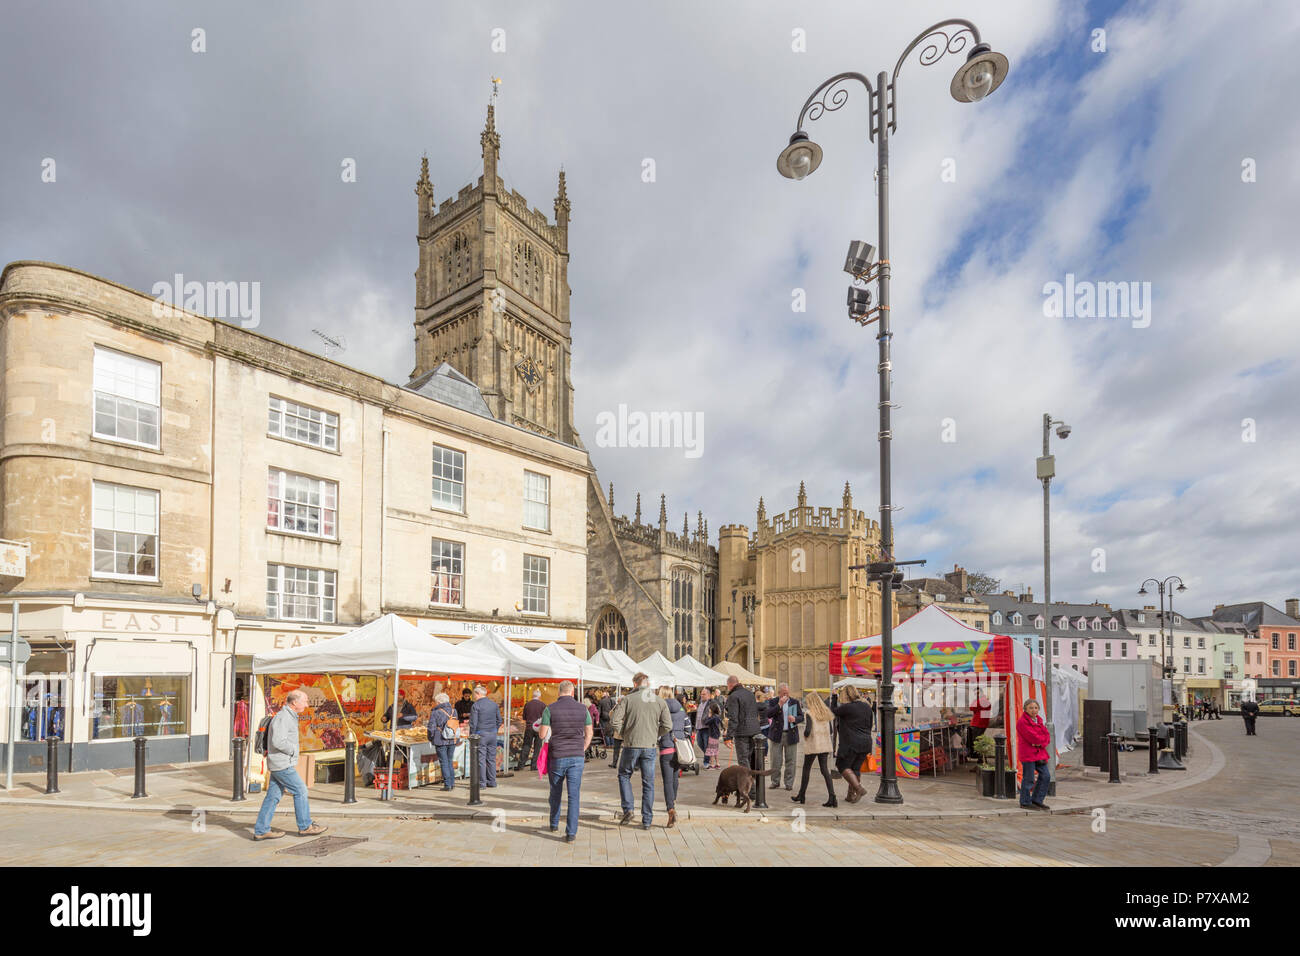 The Cotswold market town of Cirencester and The Church of St. John the Baptist, Gloucestershire, England, UK Stock Photo